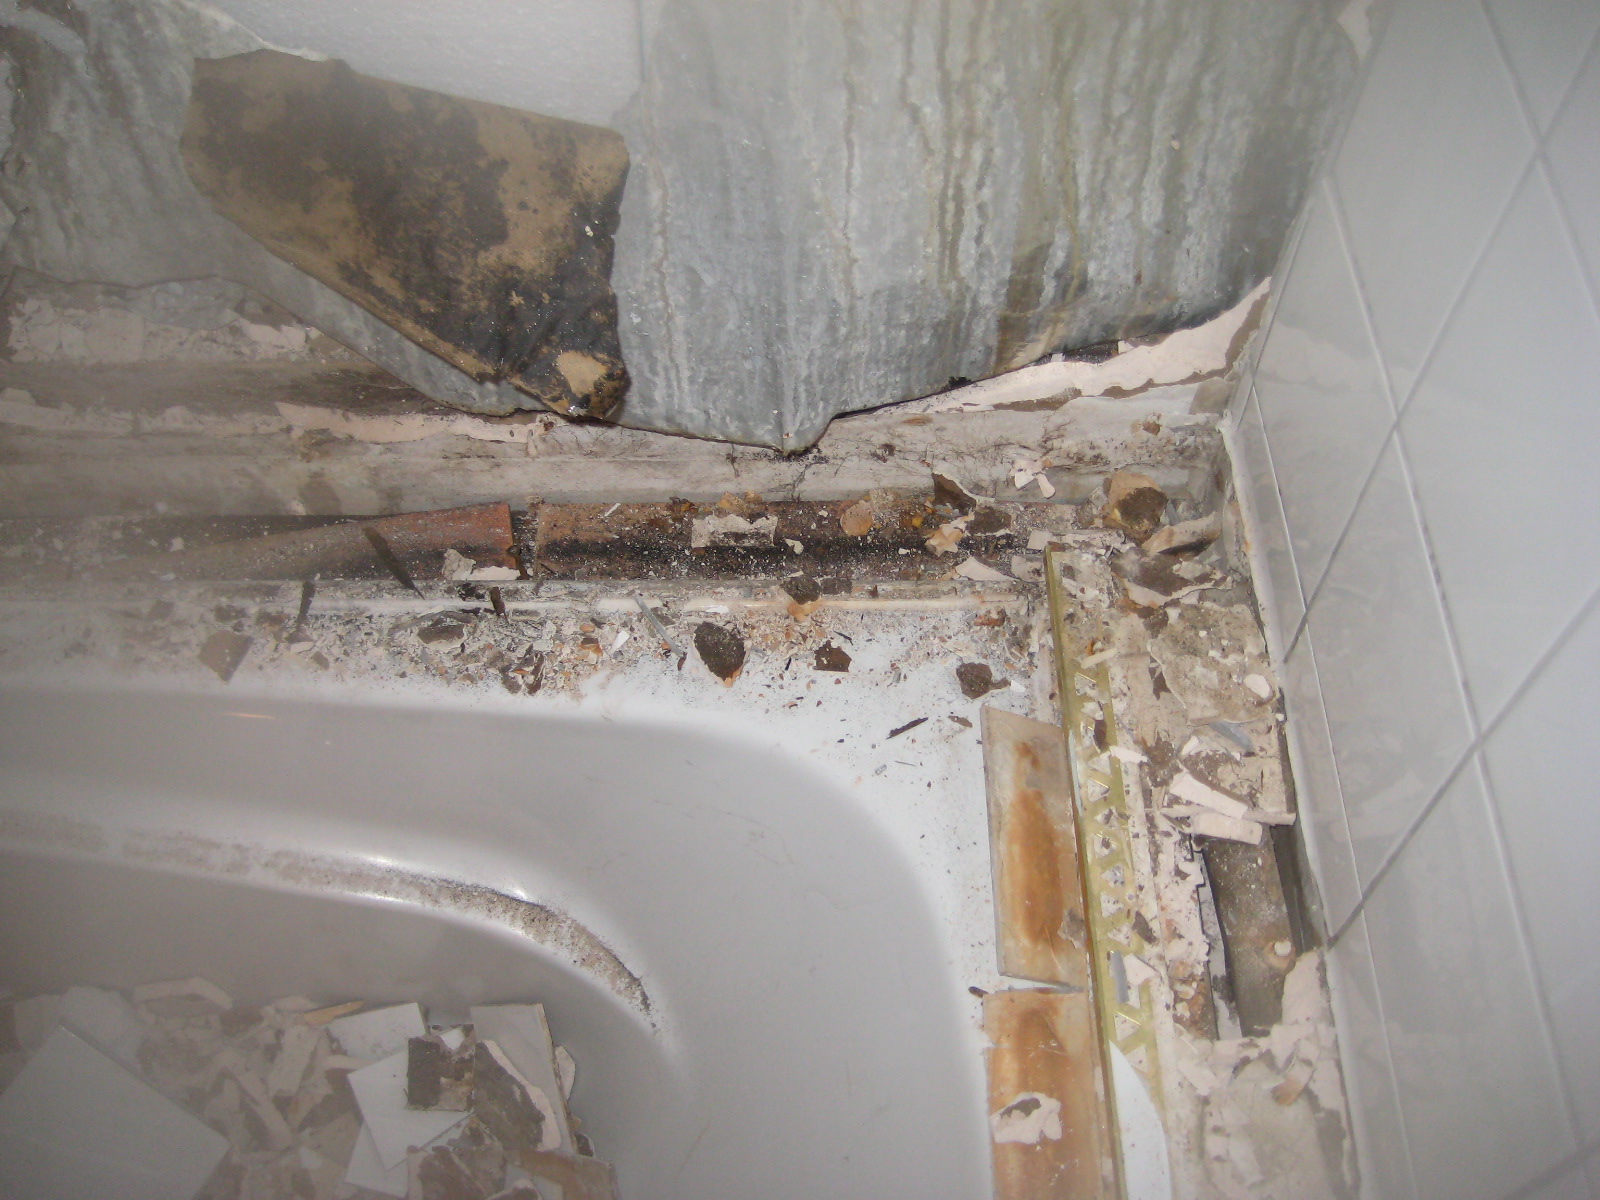 Mold vs Mildew: It’s Not Mold Until It’s Tested